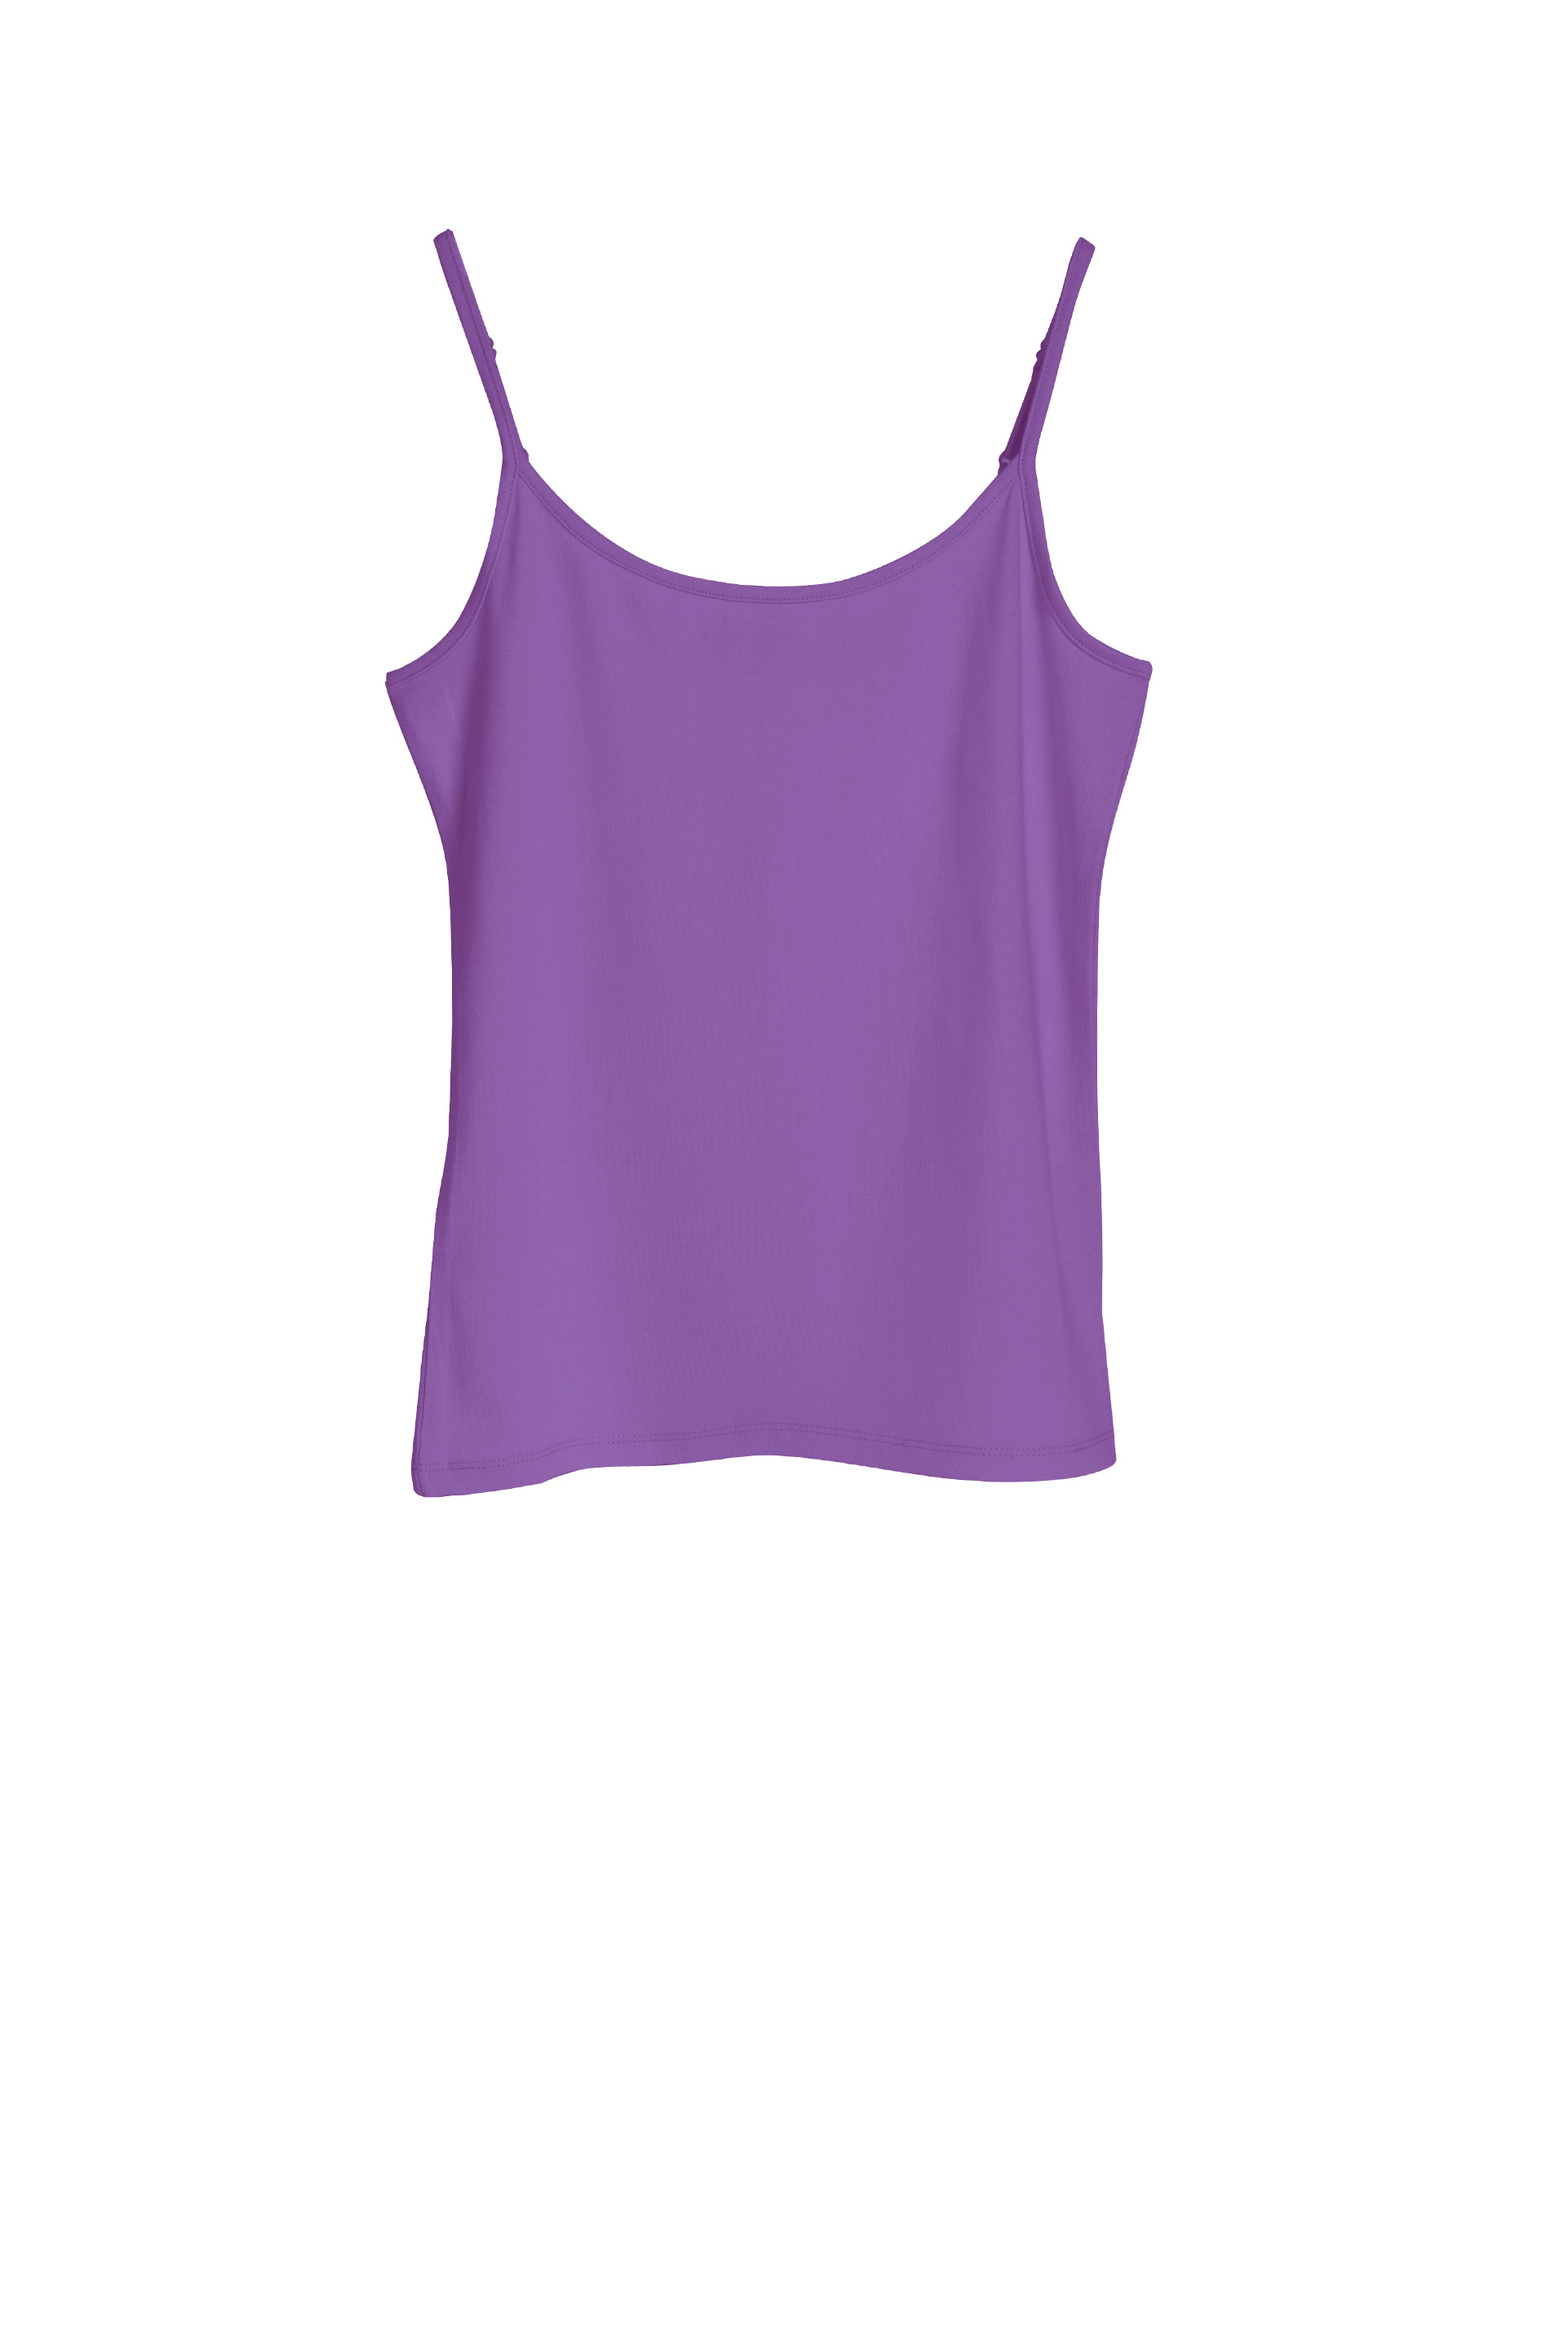 7090_camisole_violet_new_aw20.jpg